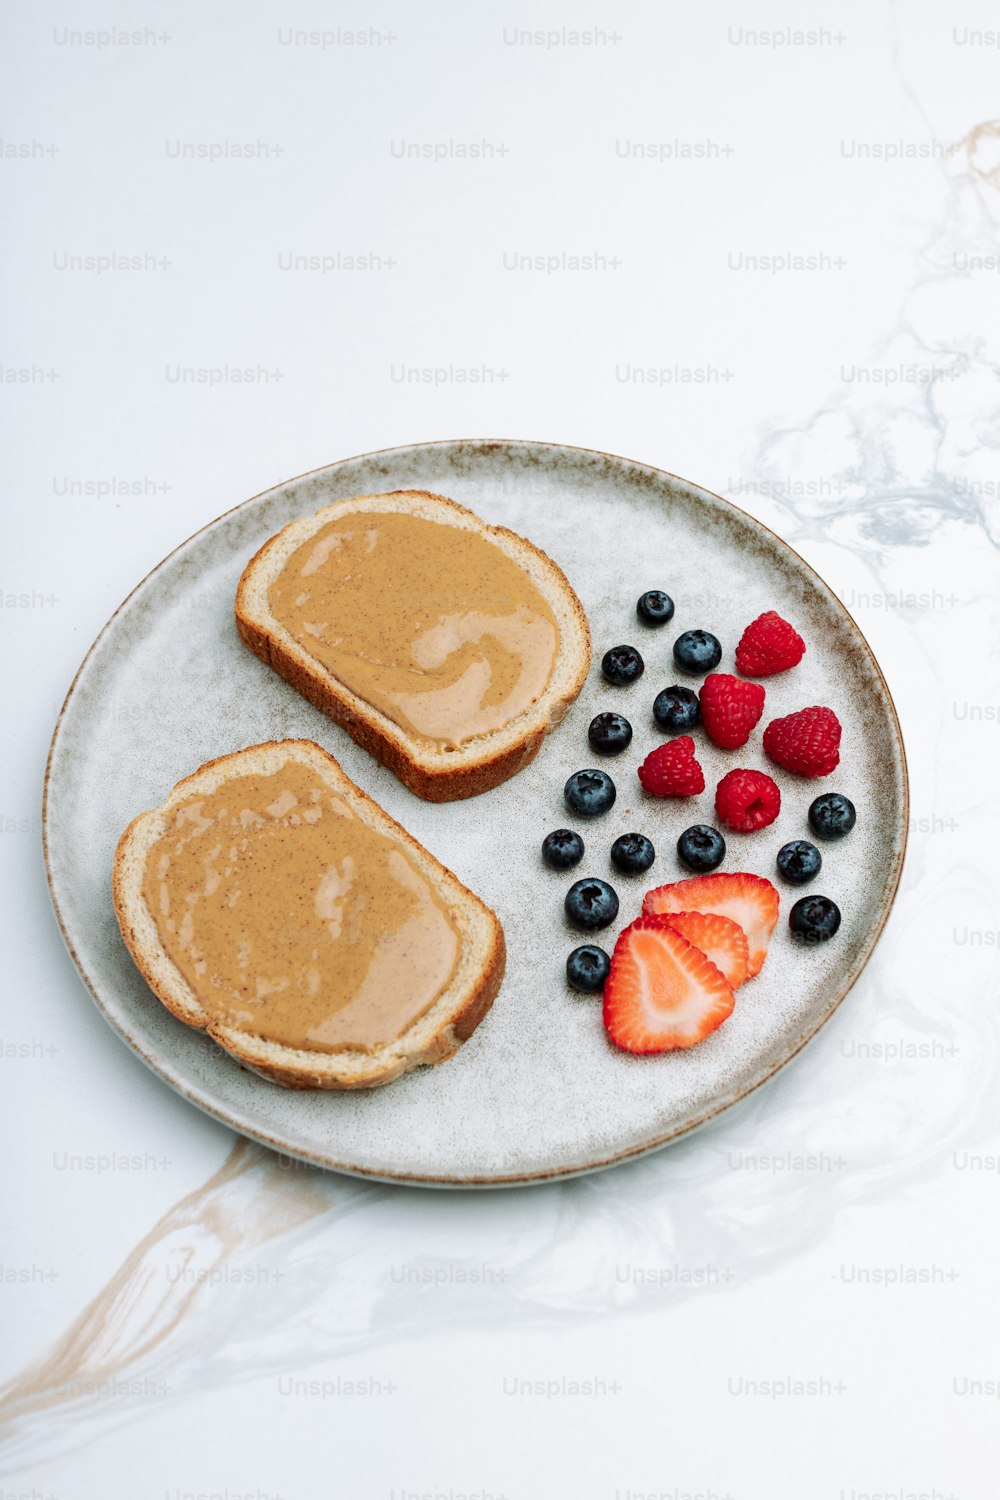 a plate of toast, berries, and peanut butter